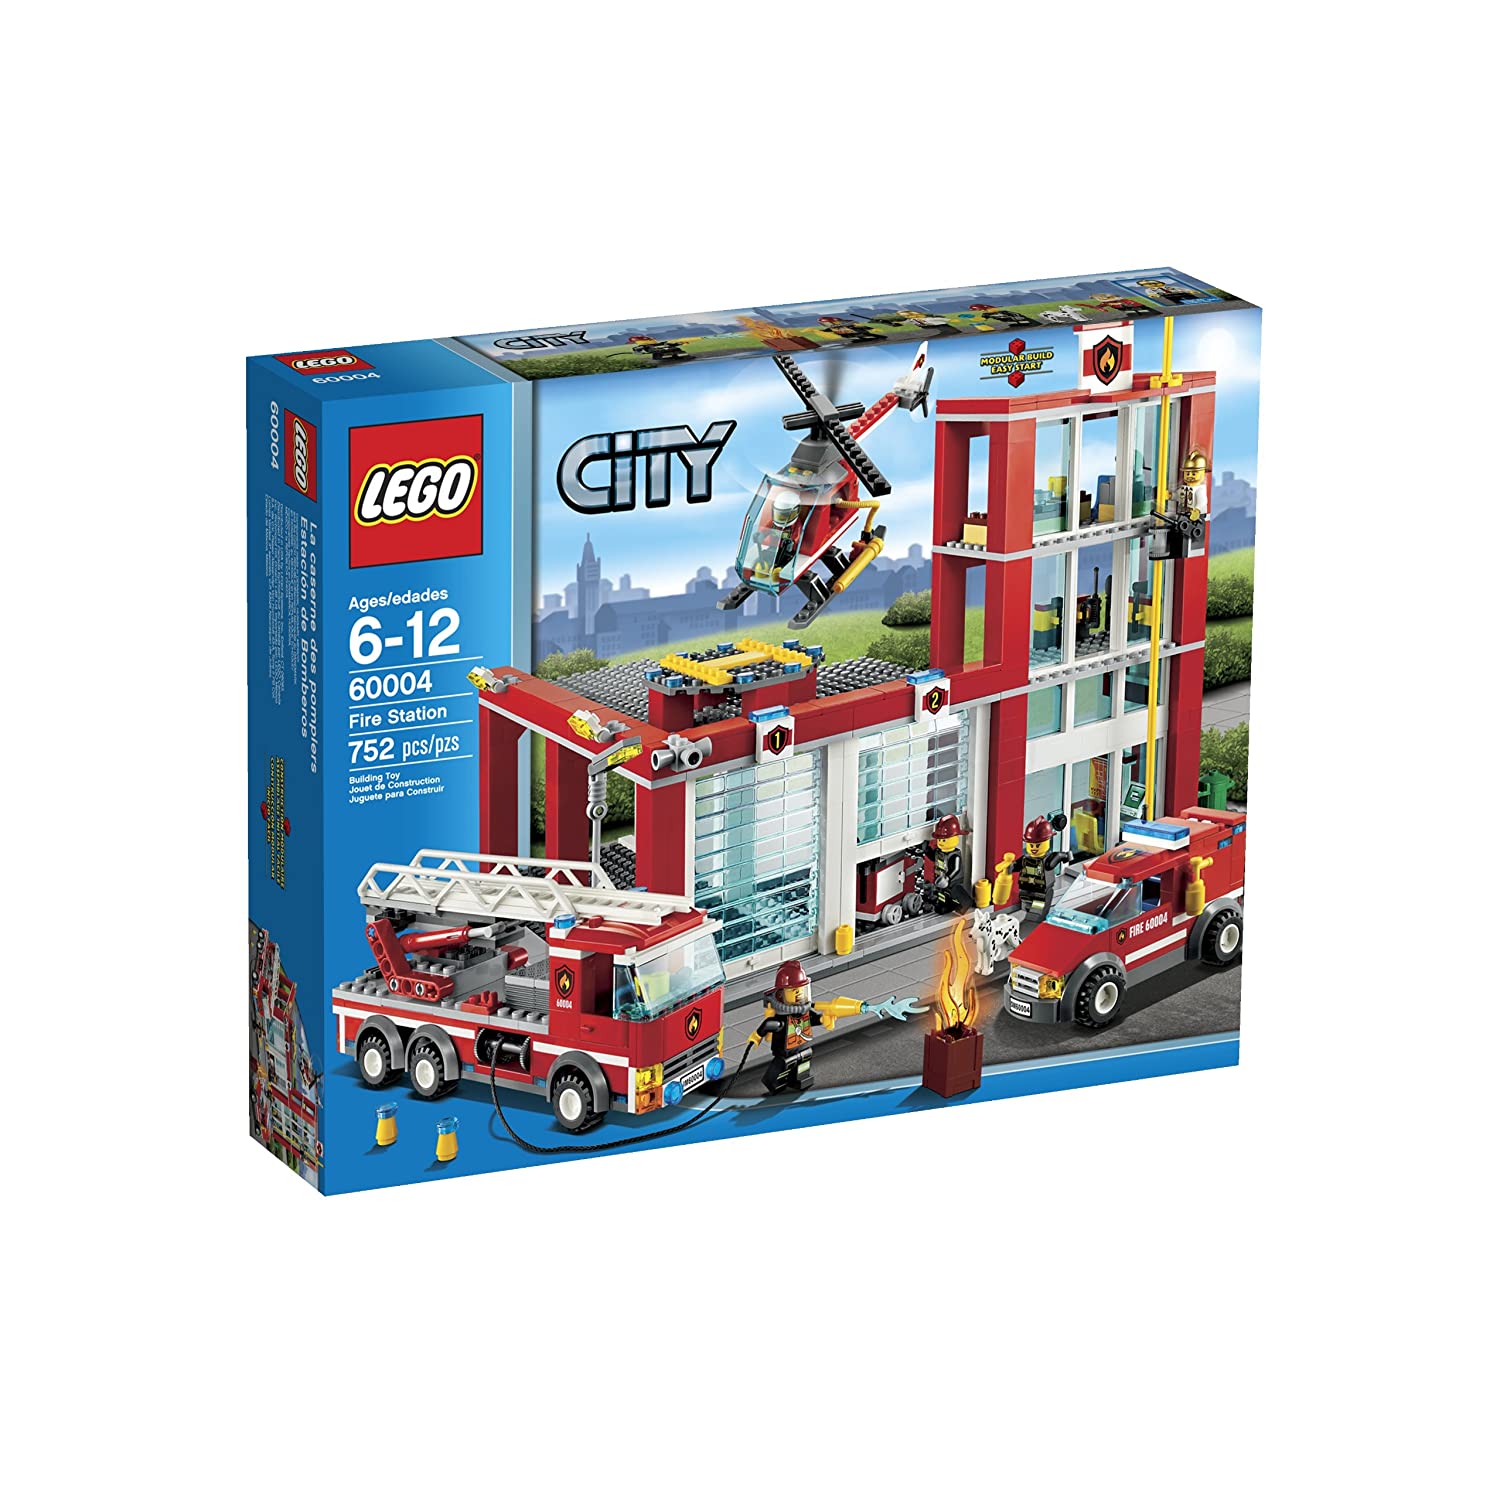 9 Best LEGO Fire Station Sets 2022 - Buying Guide 5